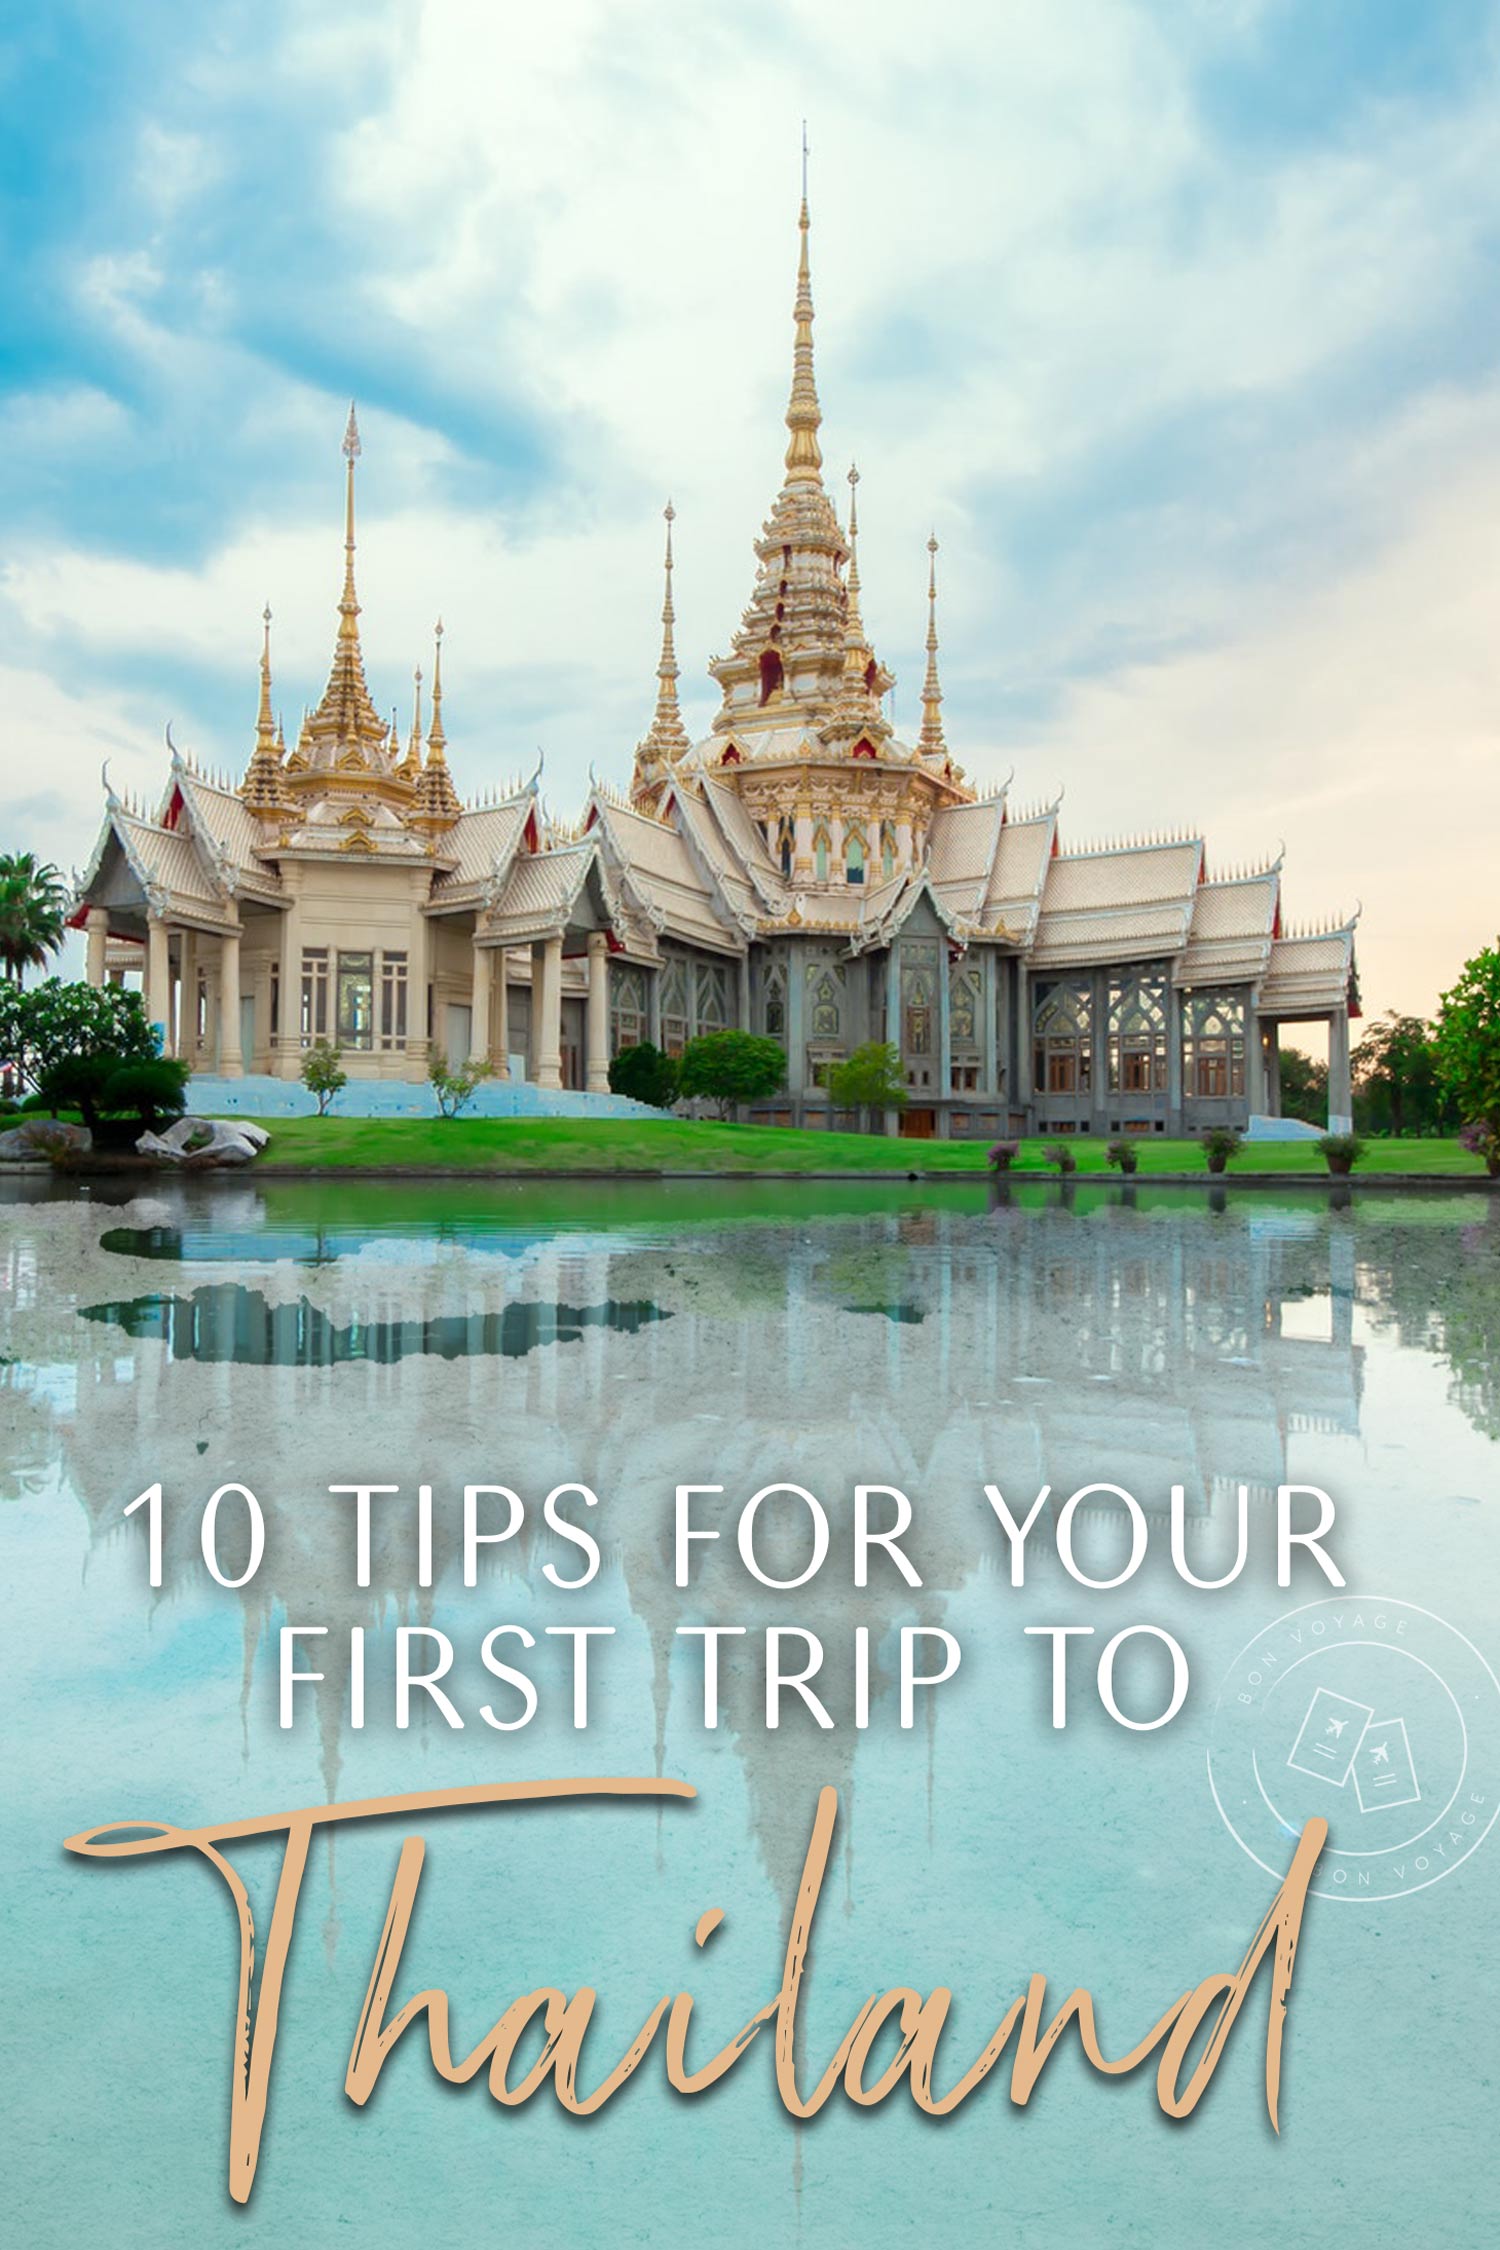 10 tips for your first trip to thailand